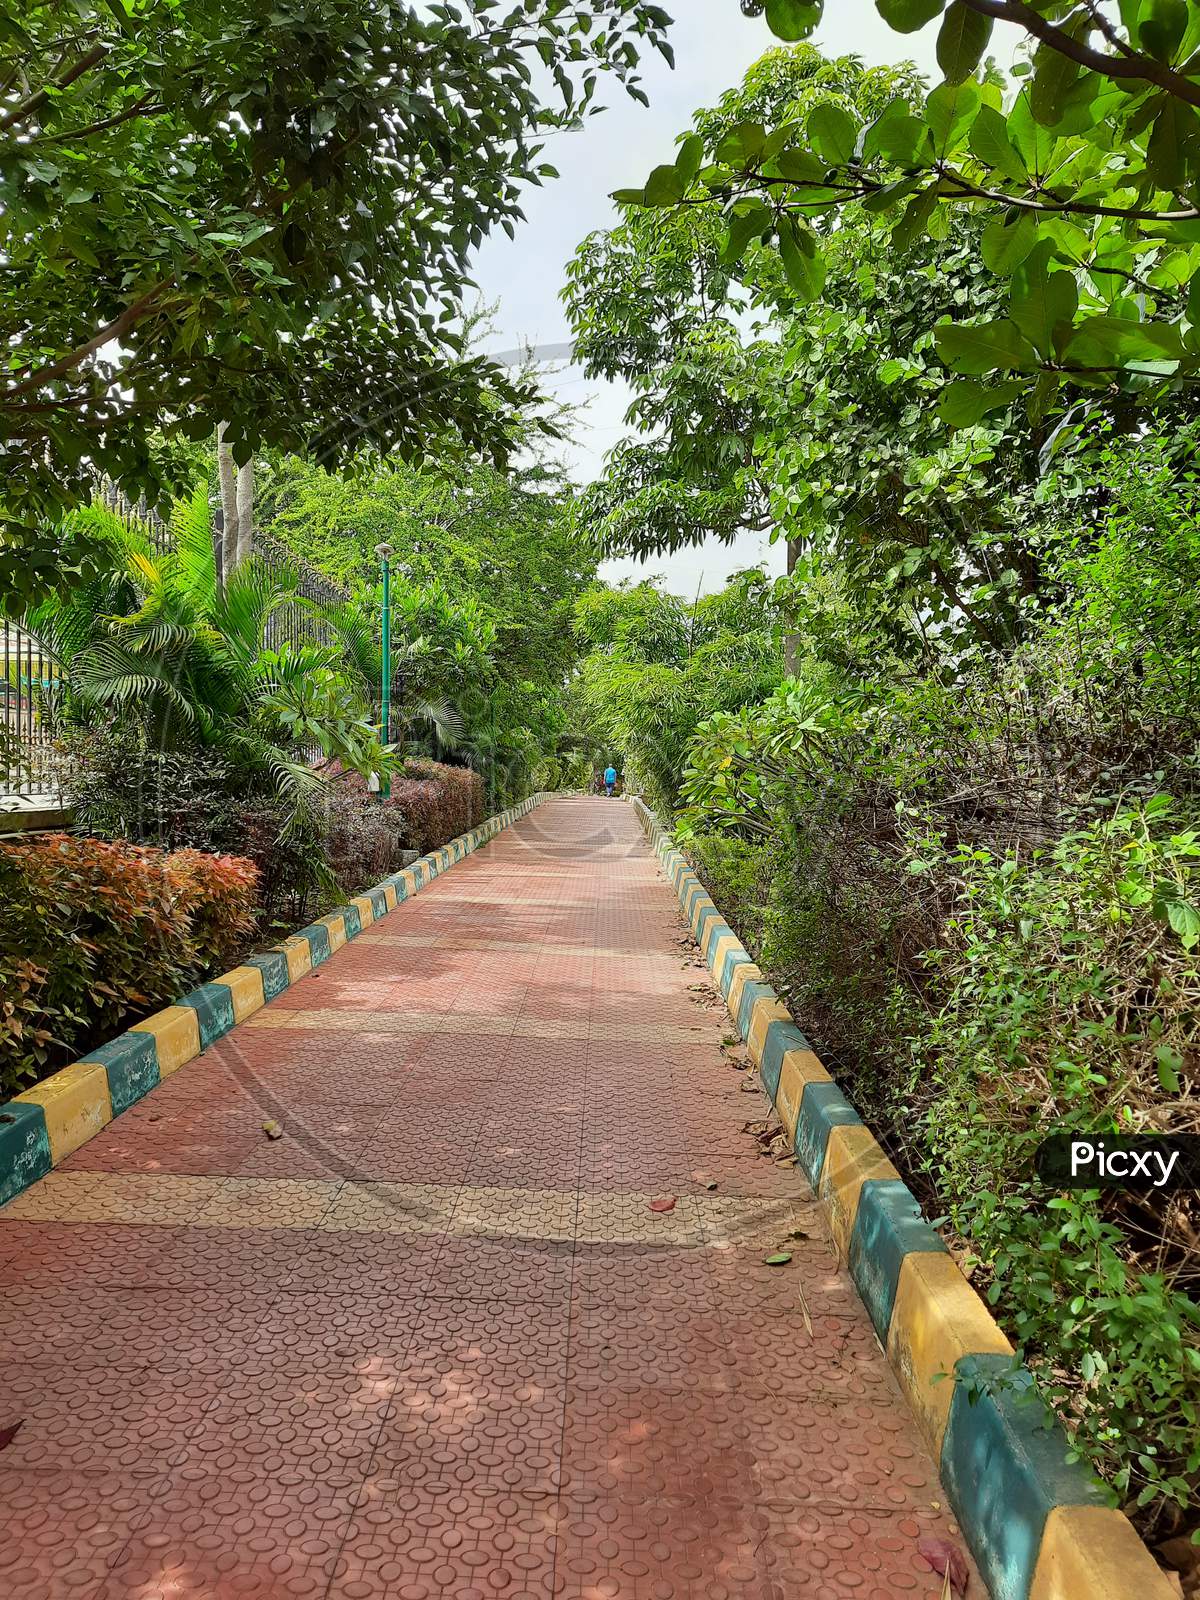 Beautiful Public Morning And Evening Walking Roads Inside The Park Well Maintained, Rock Or Stone Chairs For Sitting In The City Of Bangalore